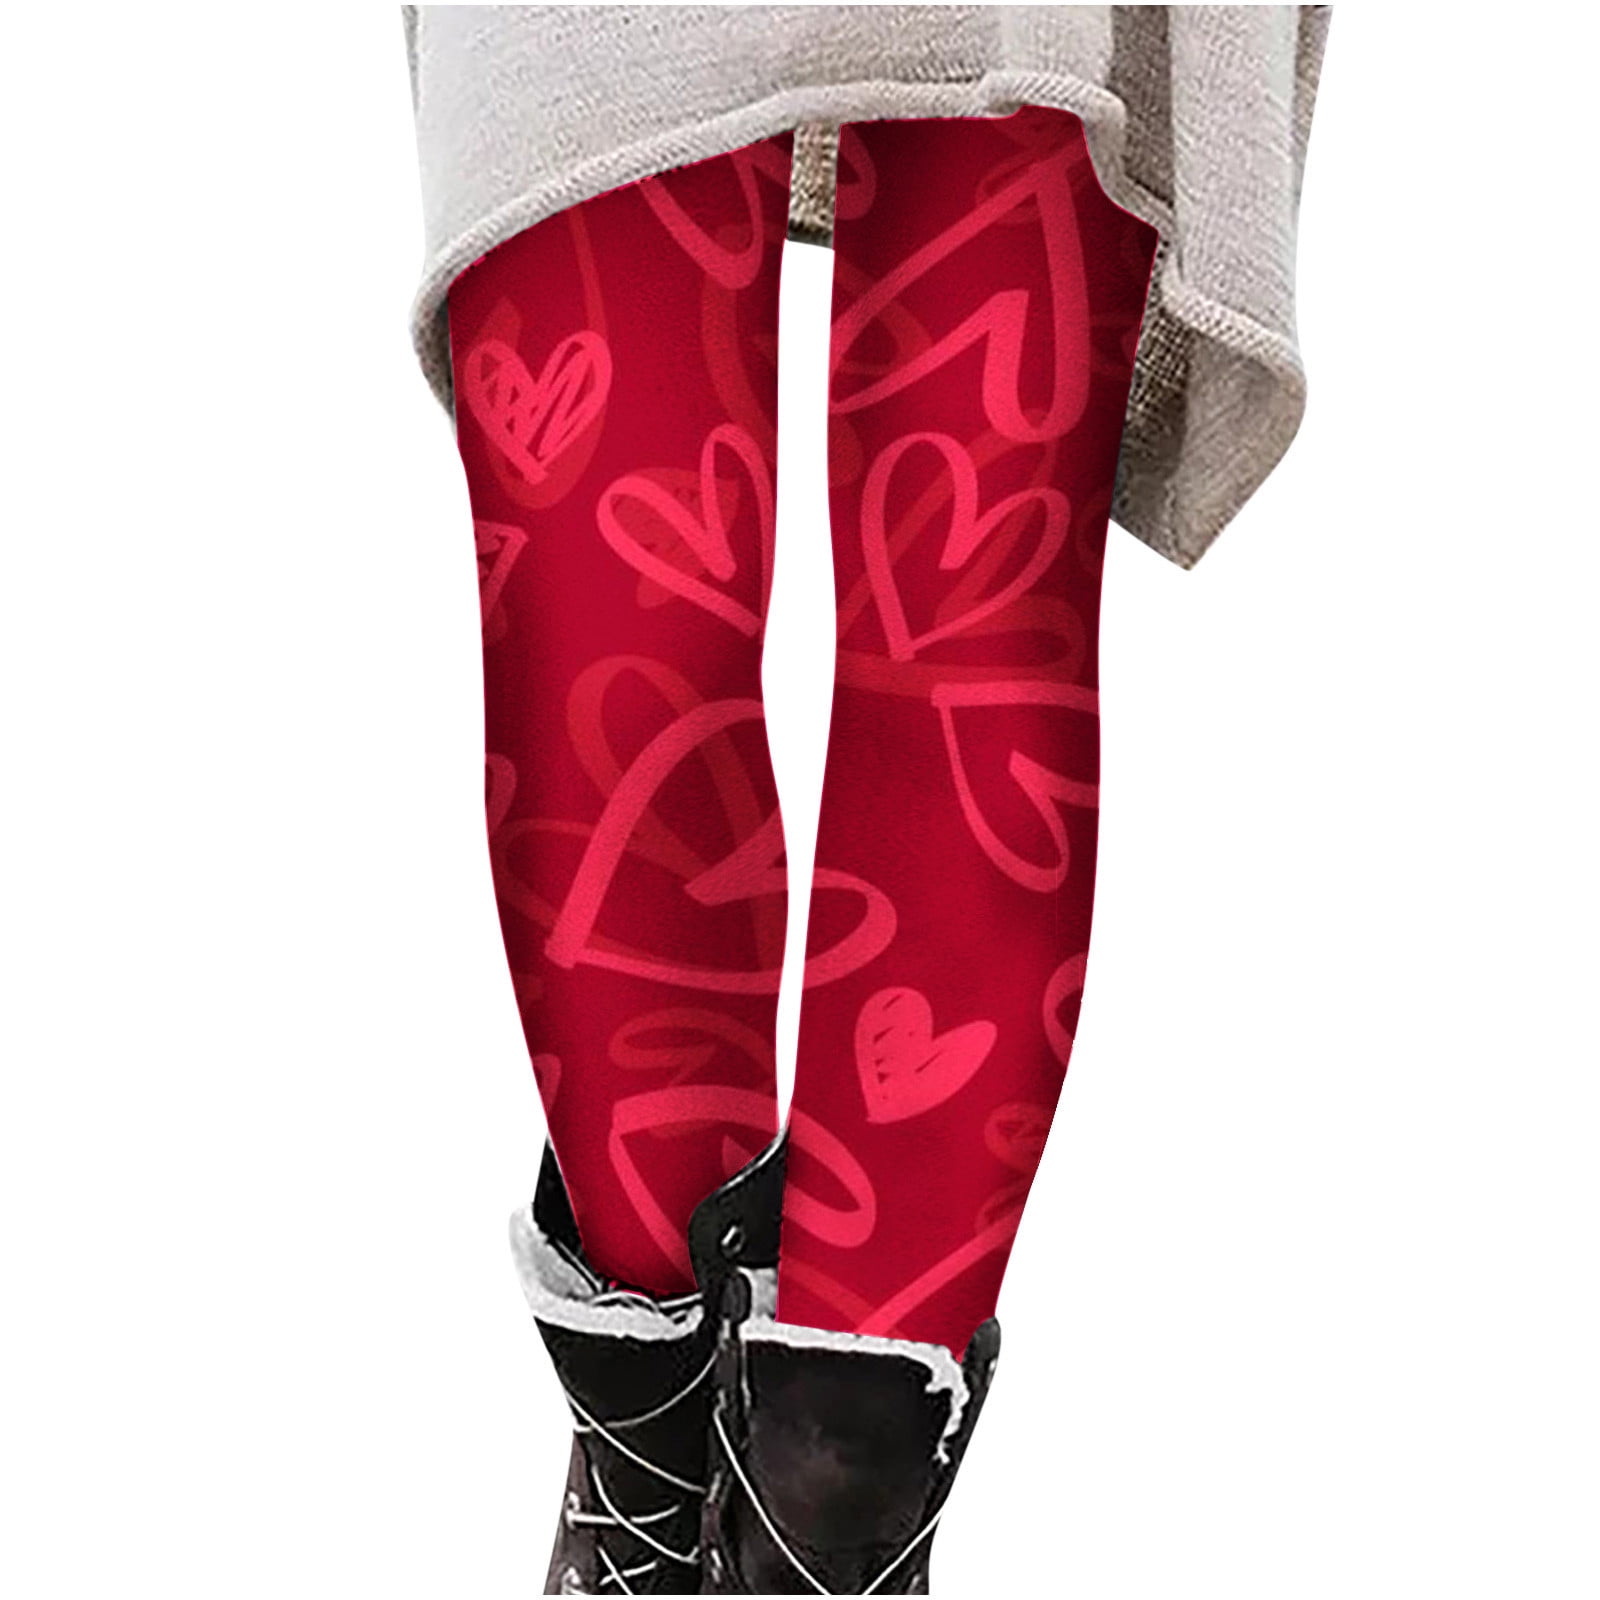 Hfyihgf Women's Valentines Day Leggings High Waisted Workout Yoga Pants  Heart Print Tummy Control Gym Fleece lined Legging(Watermelon Red,L) 